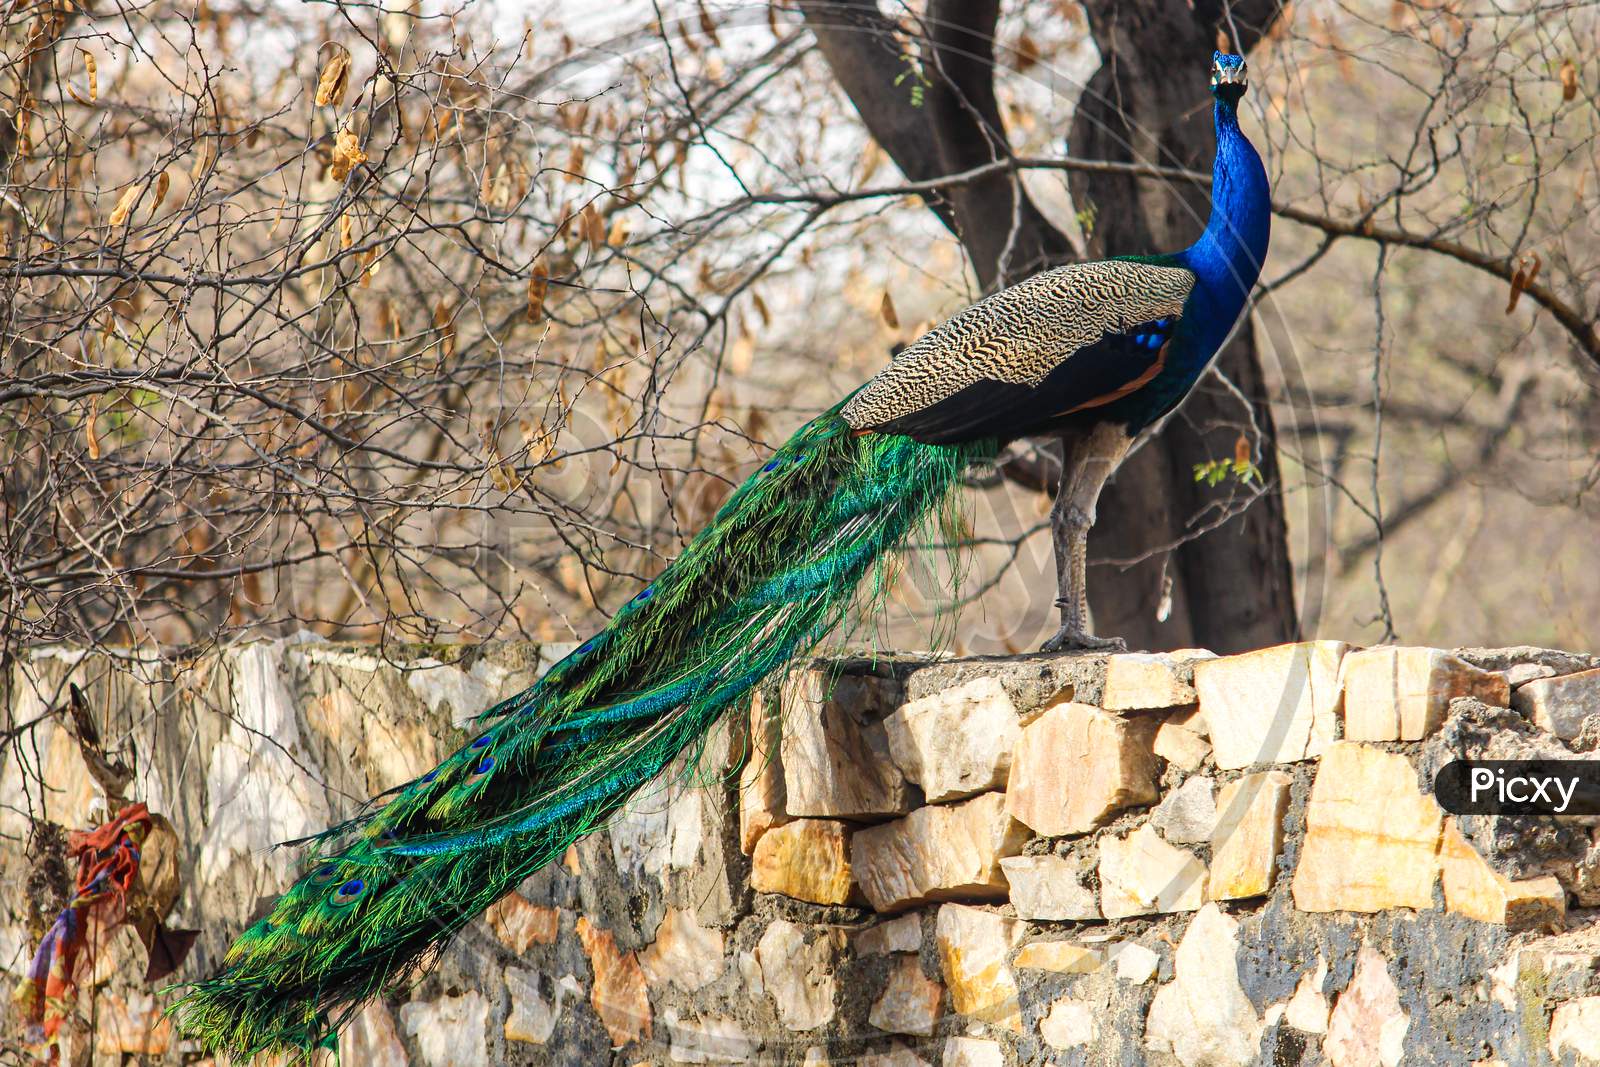 Pavo is a genus of two species in the pheasant family. The two species, along with the Congo peacock, are known as peafowl